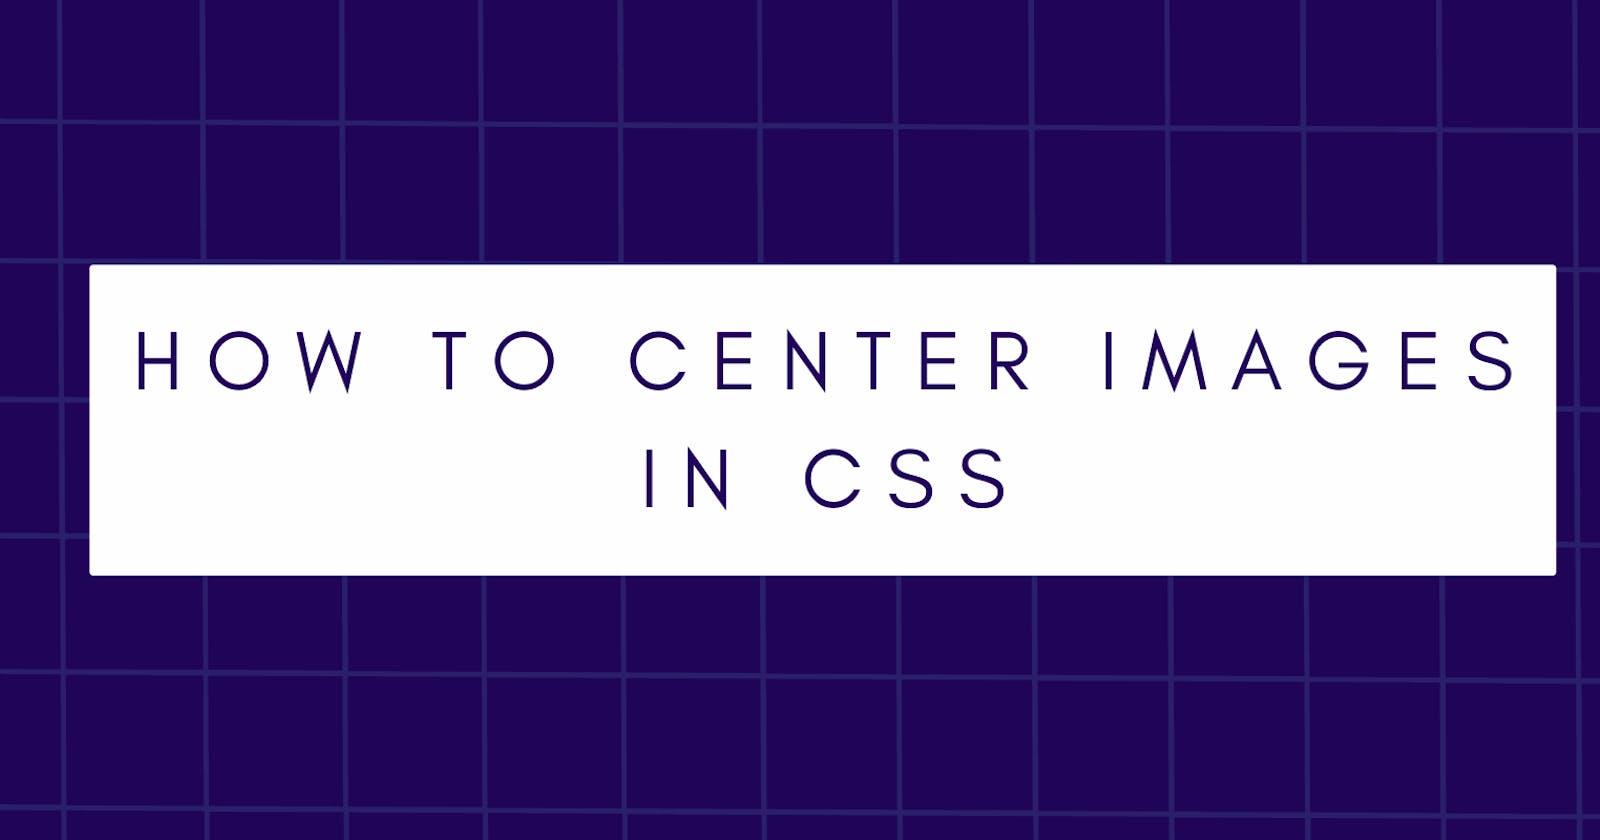 How to Center Images in CSS